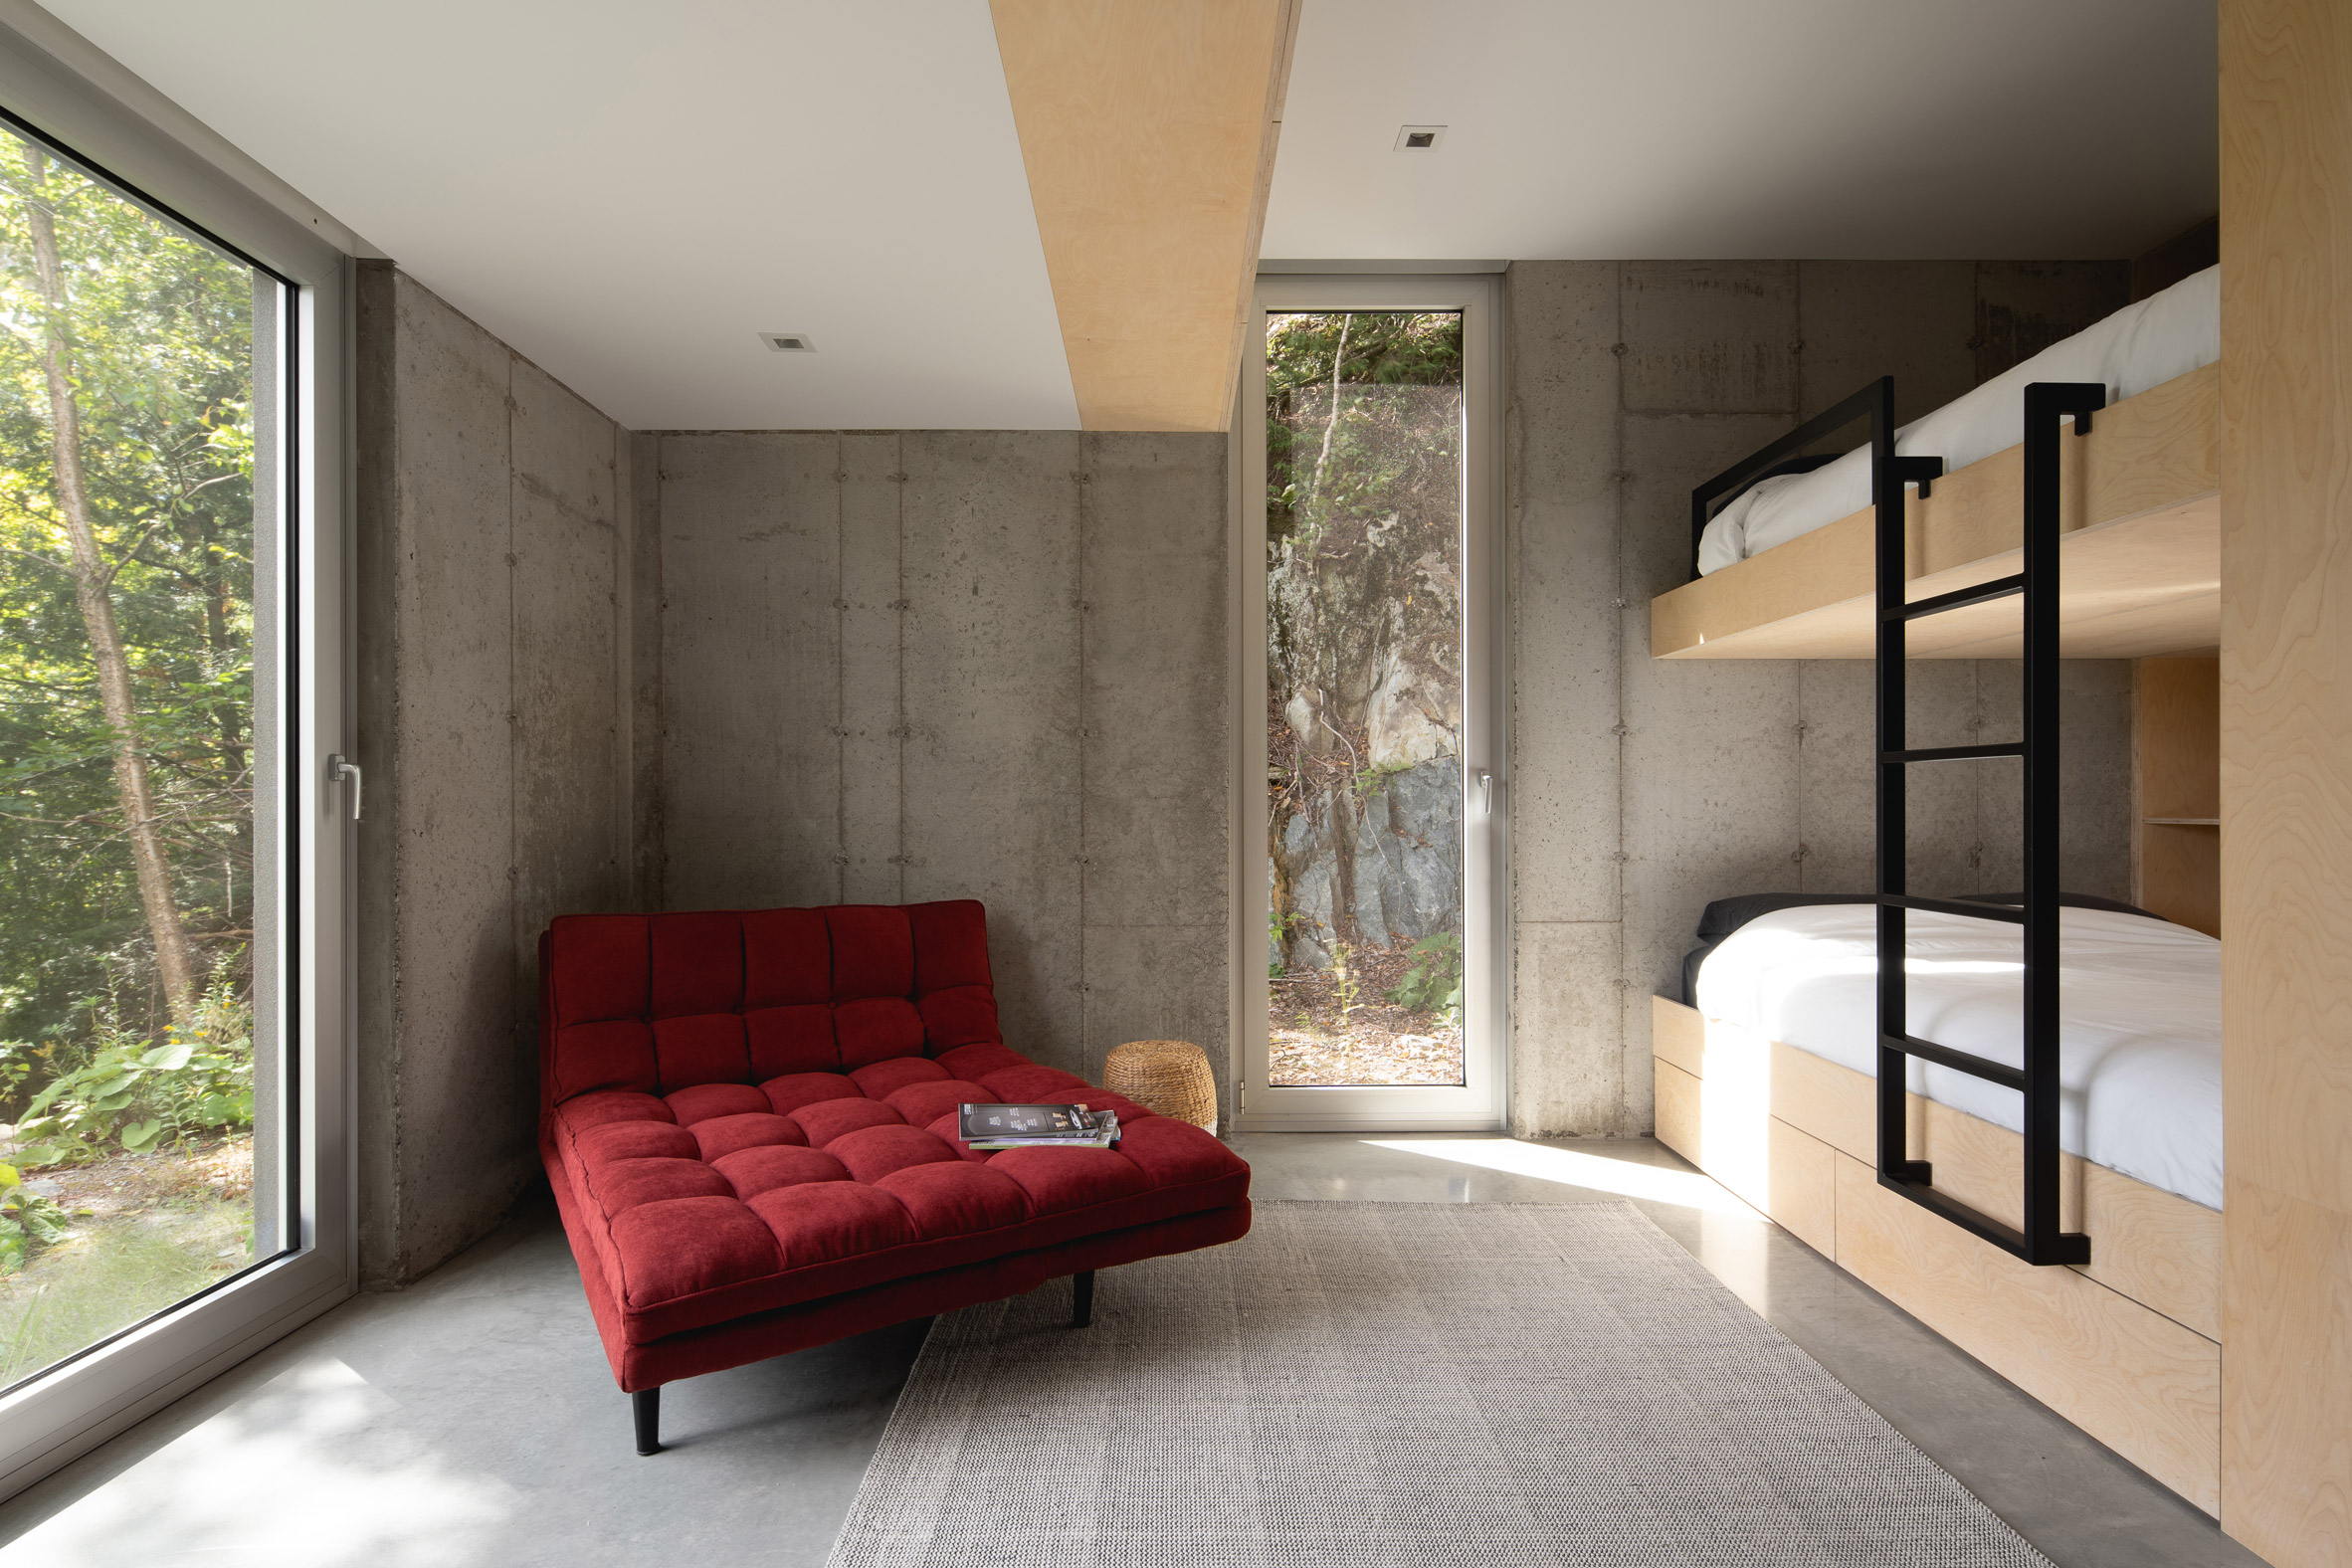 Sofa in bunk room of Forest House I by Natalie Dionne Architecture